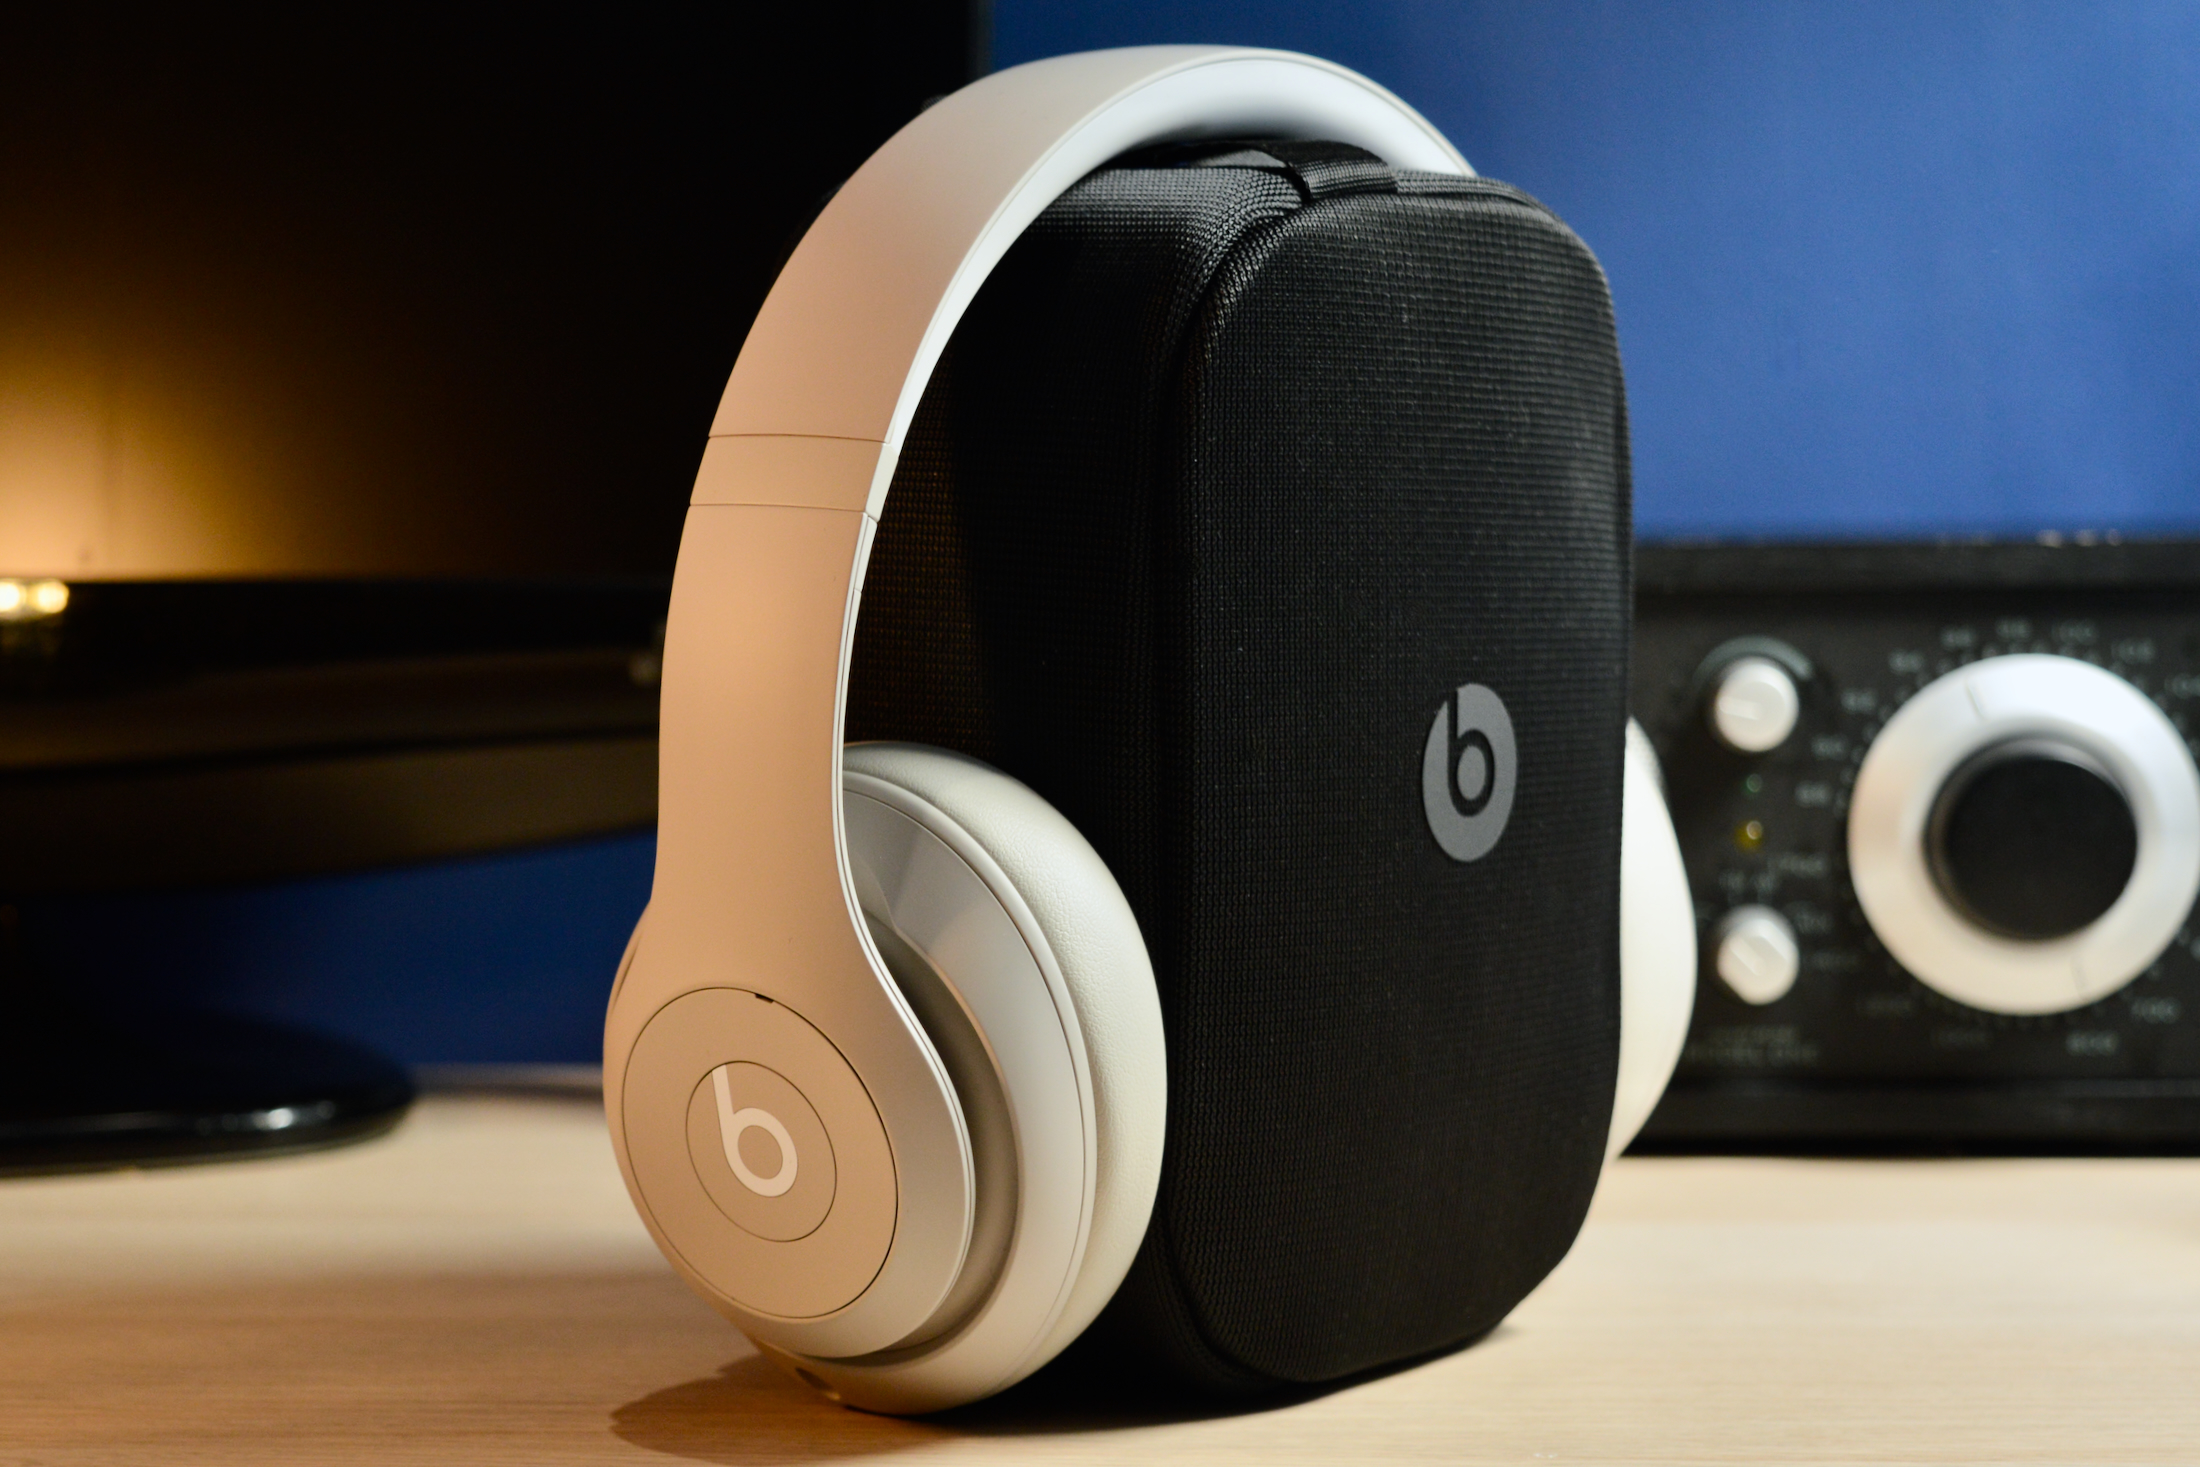 spatial new for Beats Studio a lossless Beats world Digital review: Trends and Pro |